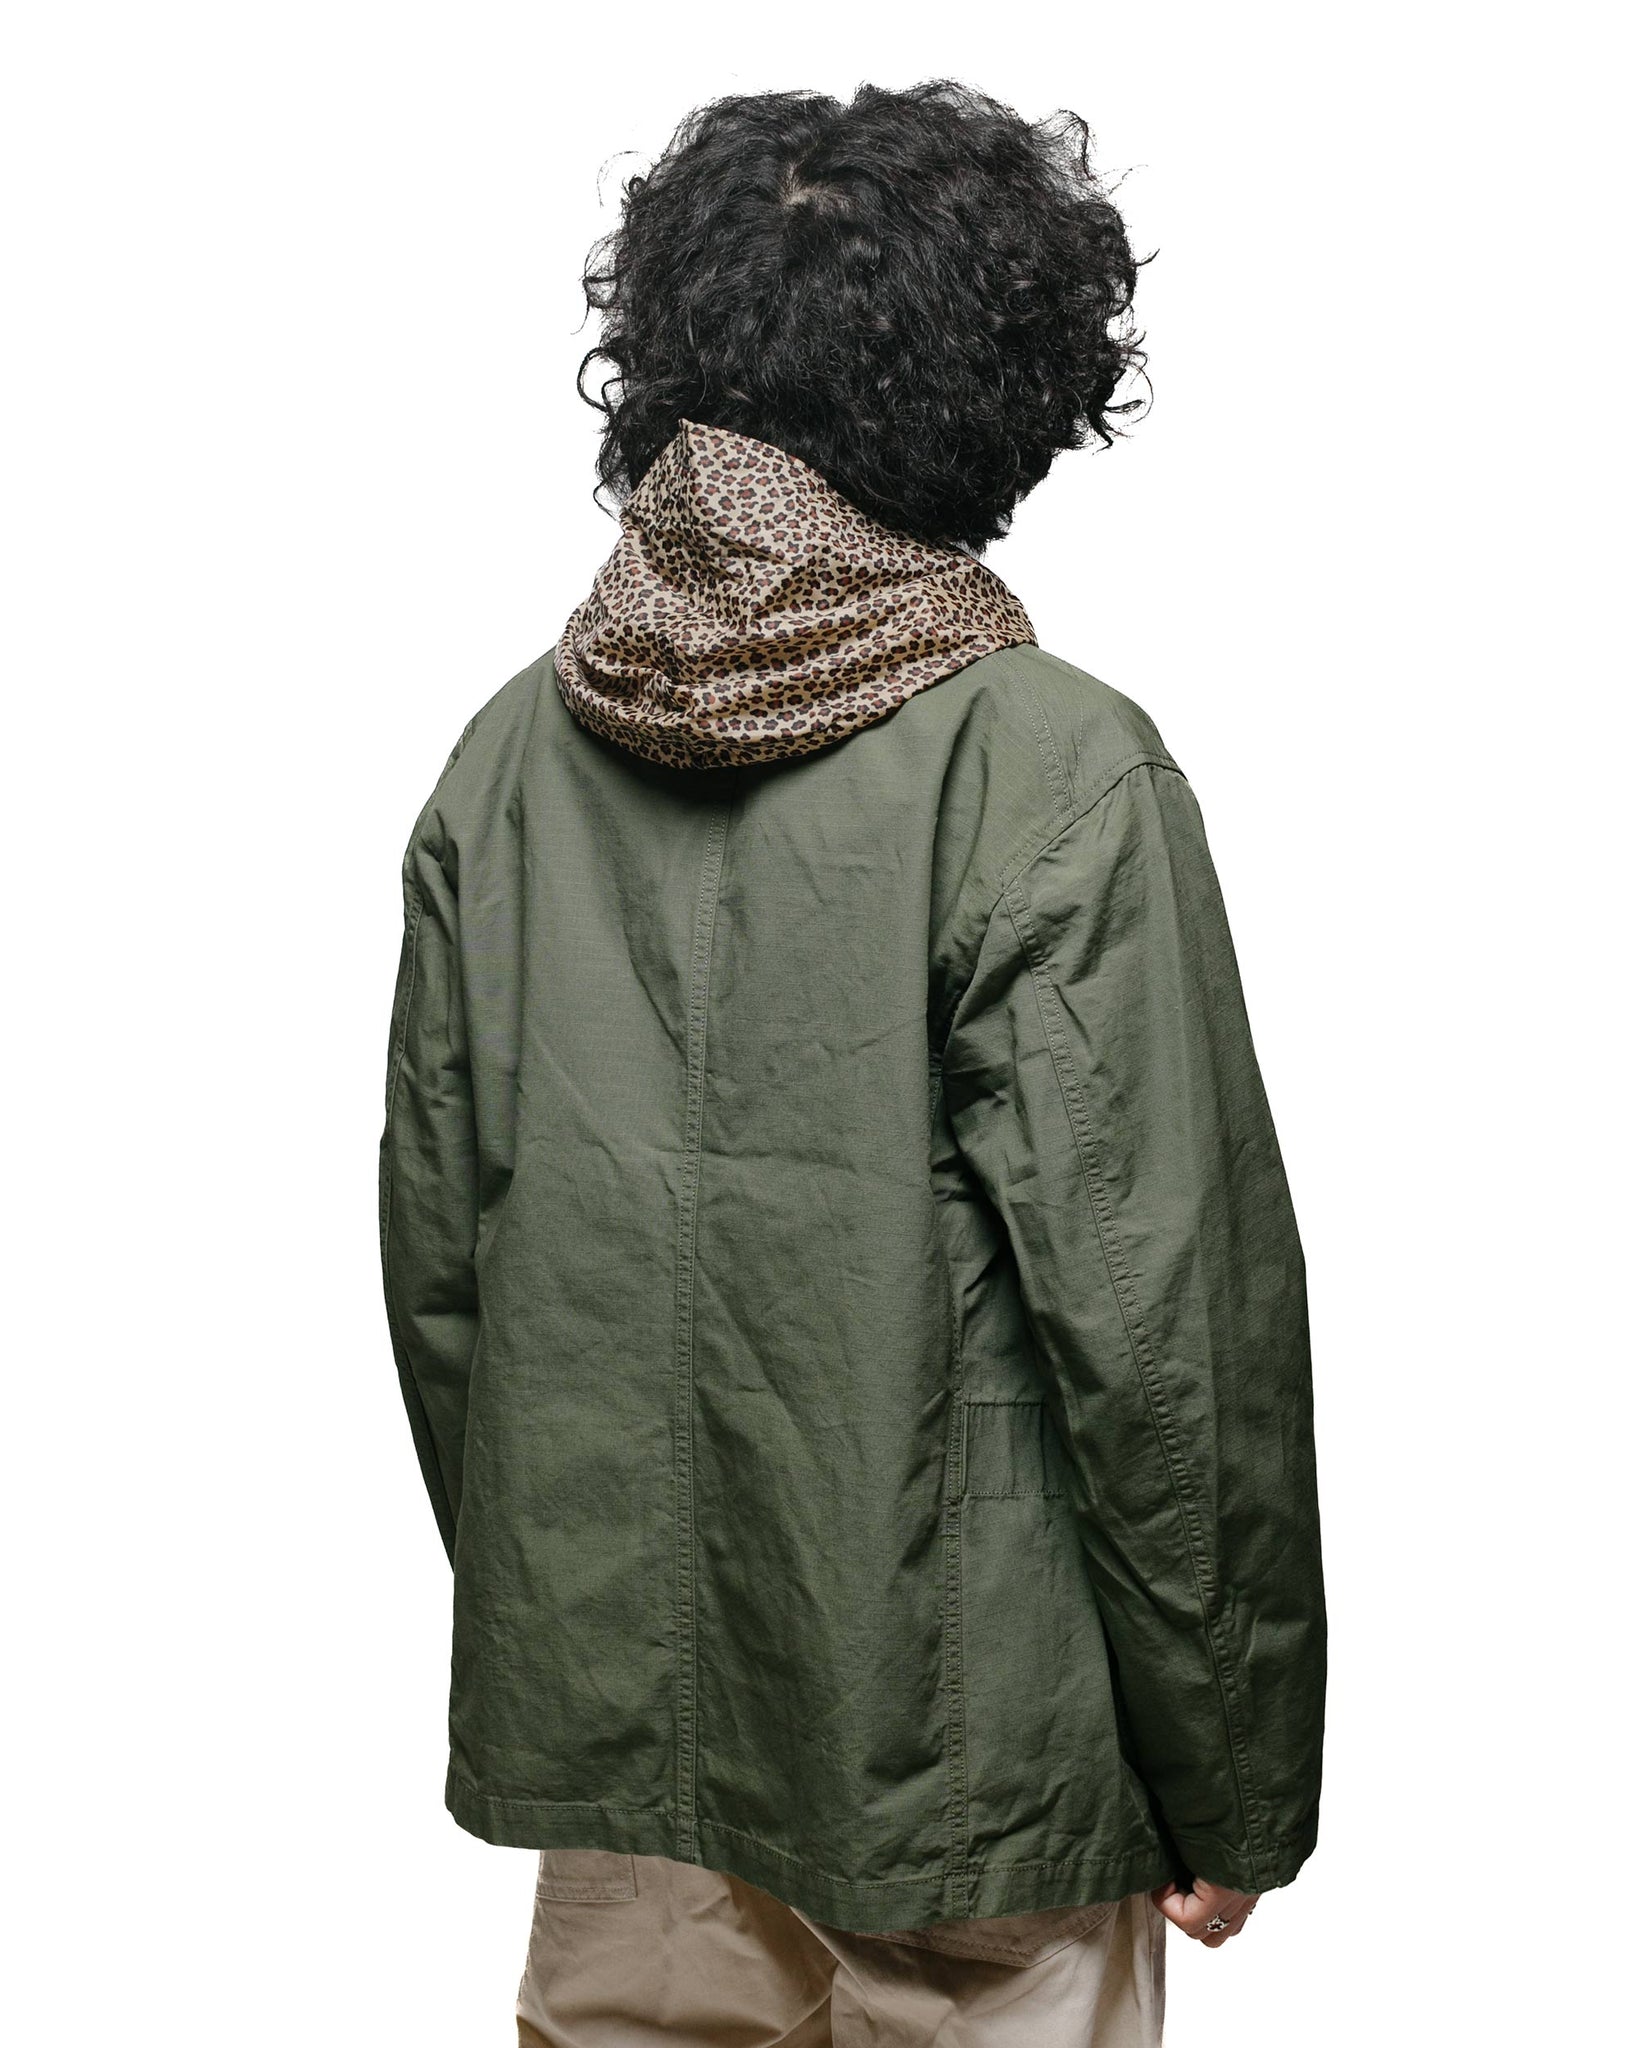 Engineered Garments Bedford Jacket Olive Cotton Ripstop